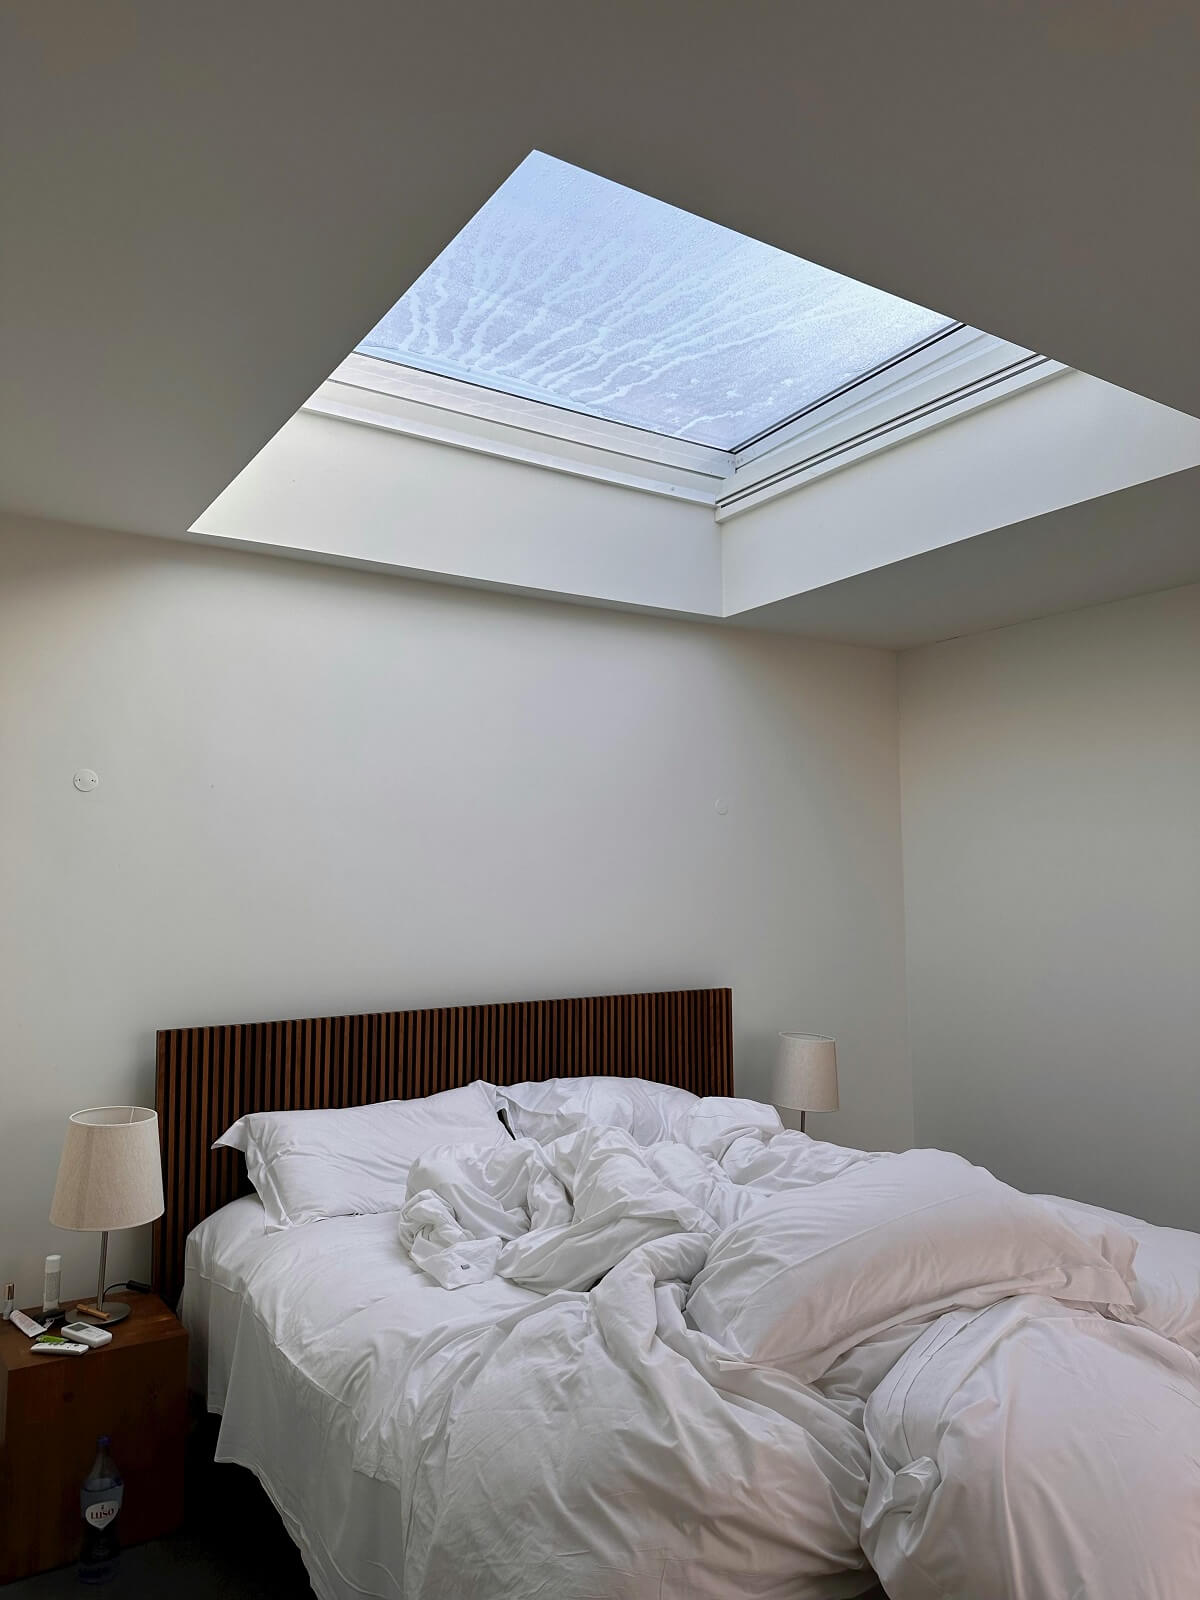 Great Reasons To Install Skylights During Home Remodeling - Mares & Dow Construction & Skylights